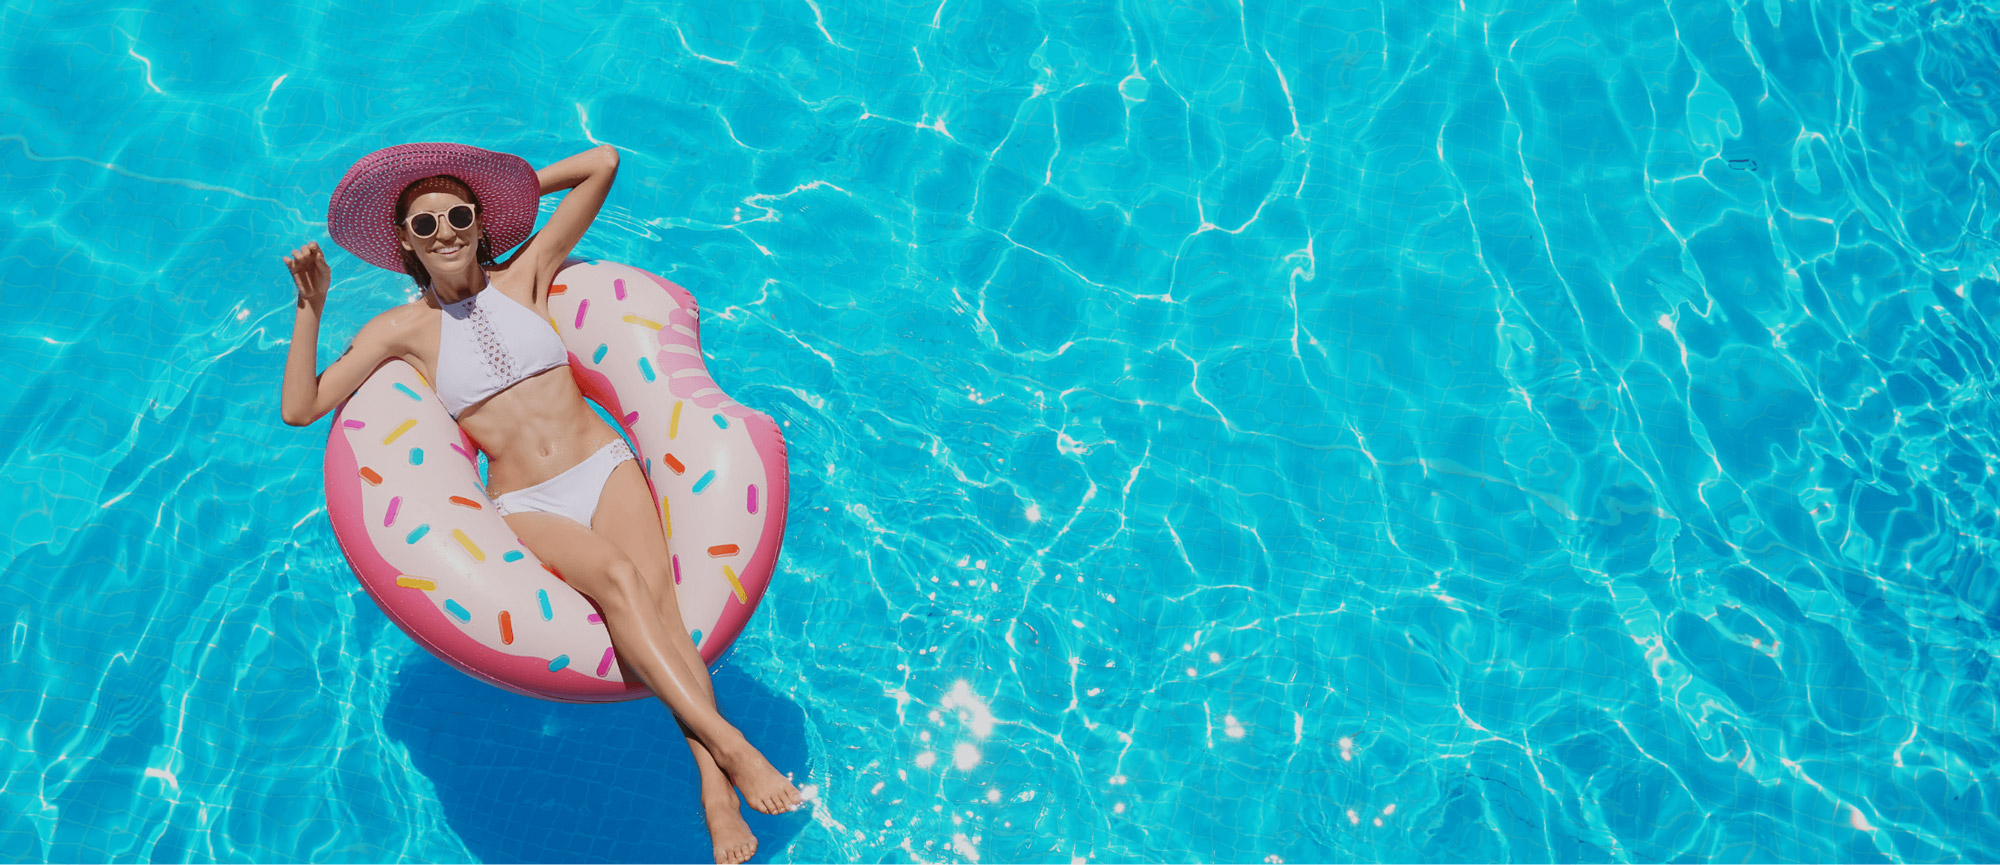 How to Prepare Your Pool for the Summer Season